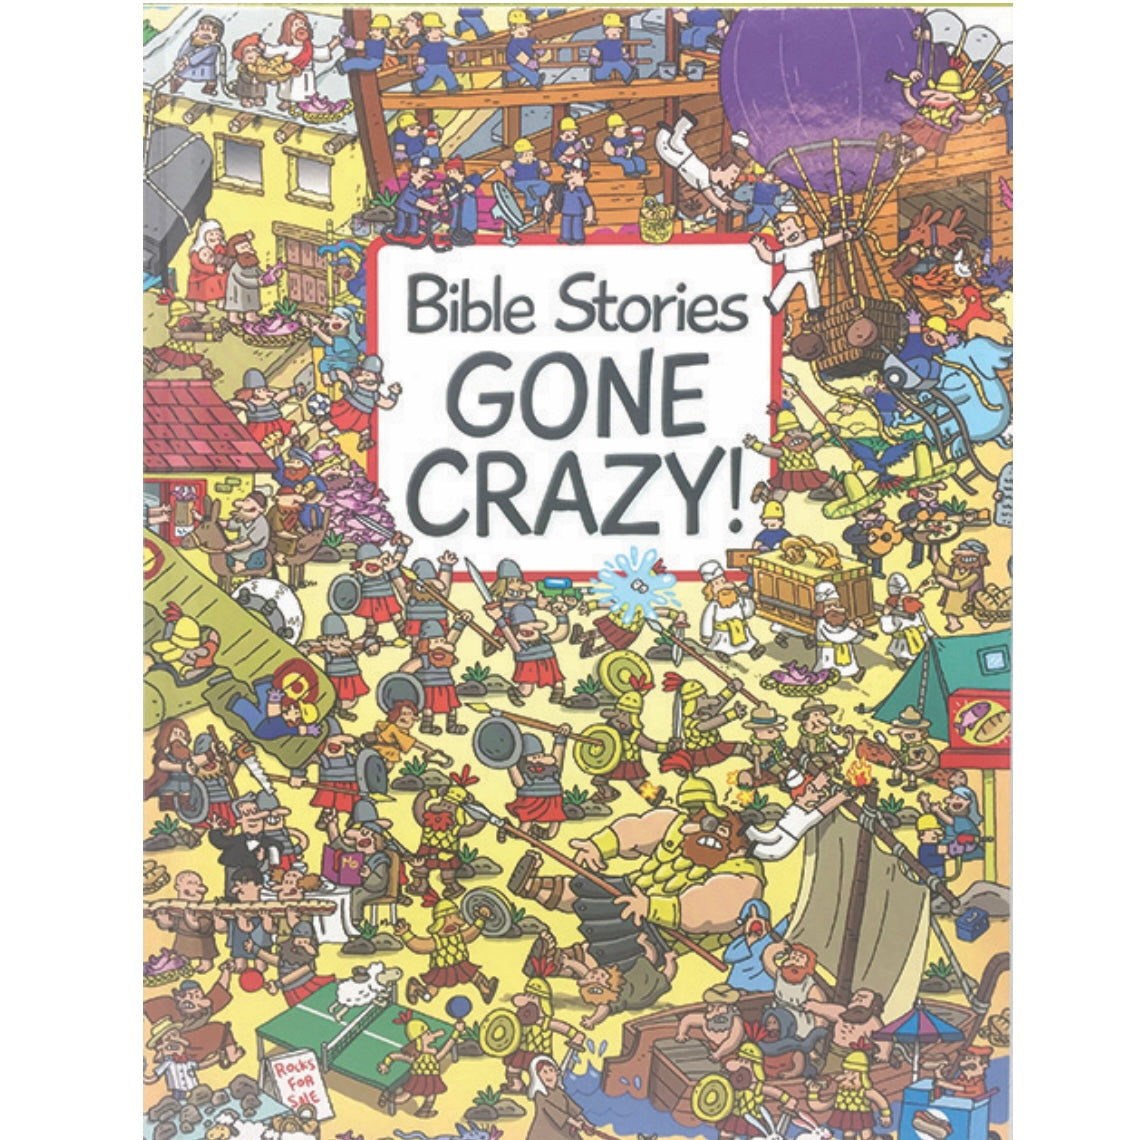 BIBLE STORIES GONE CRAZY!